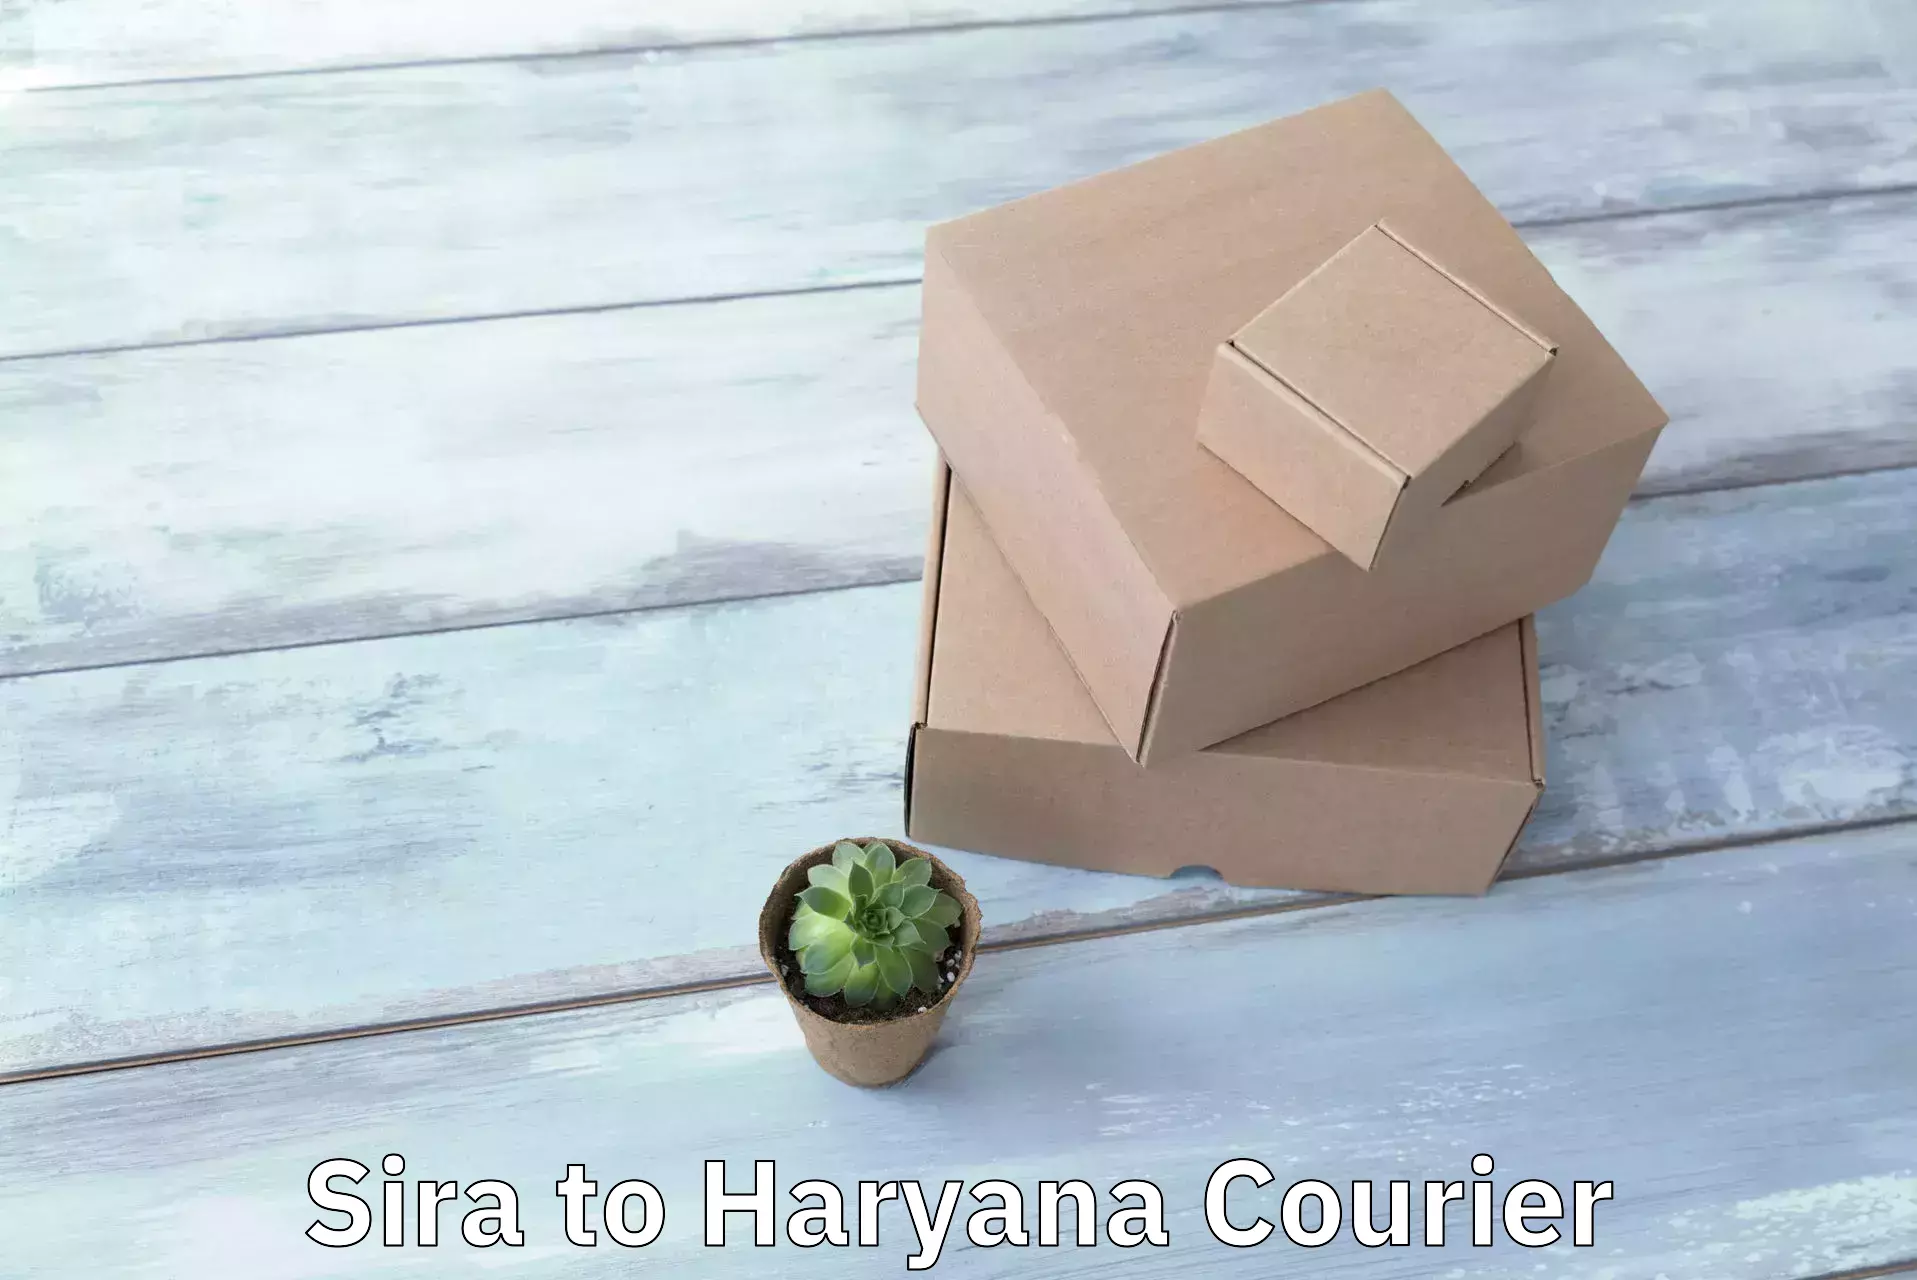 Courier service comparison Sira to Dharuhera